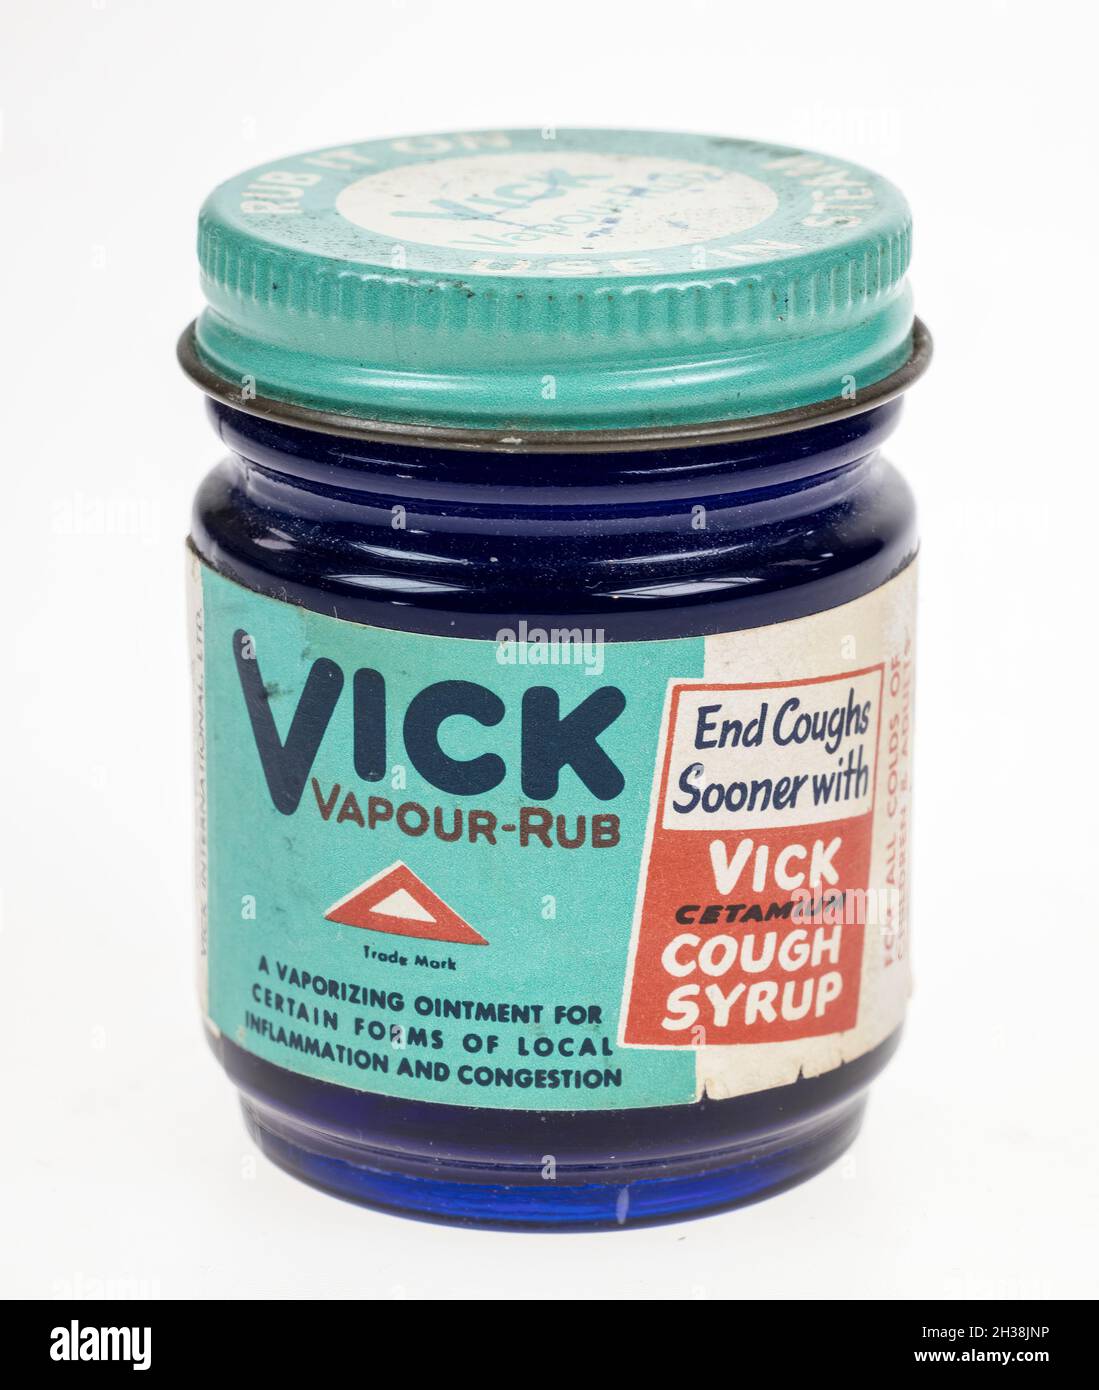 Vick vapour-rub jar of ointment dating to the 1960s, UK Stock Photo